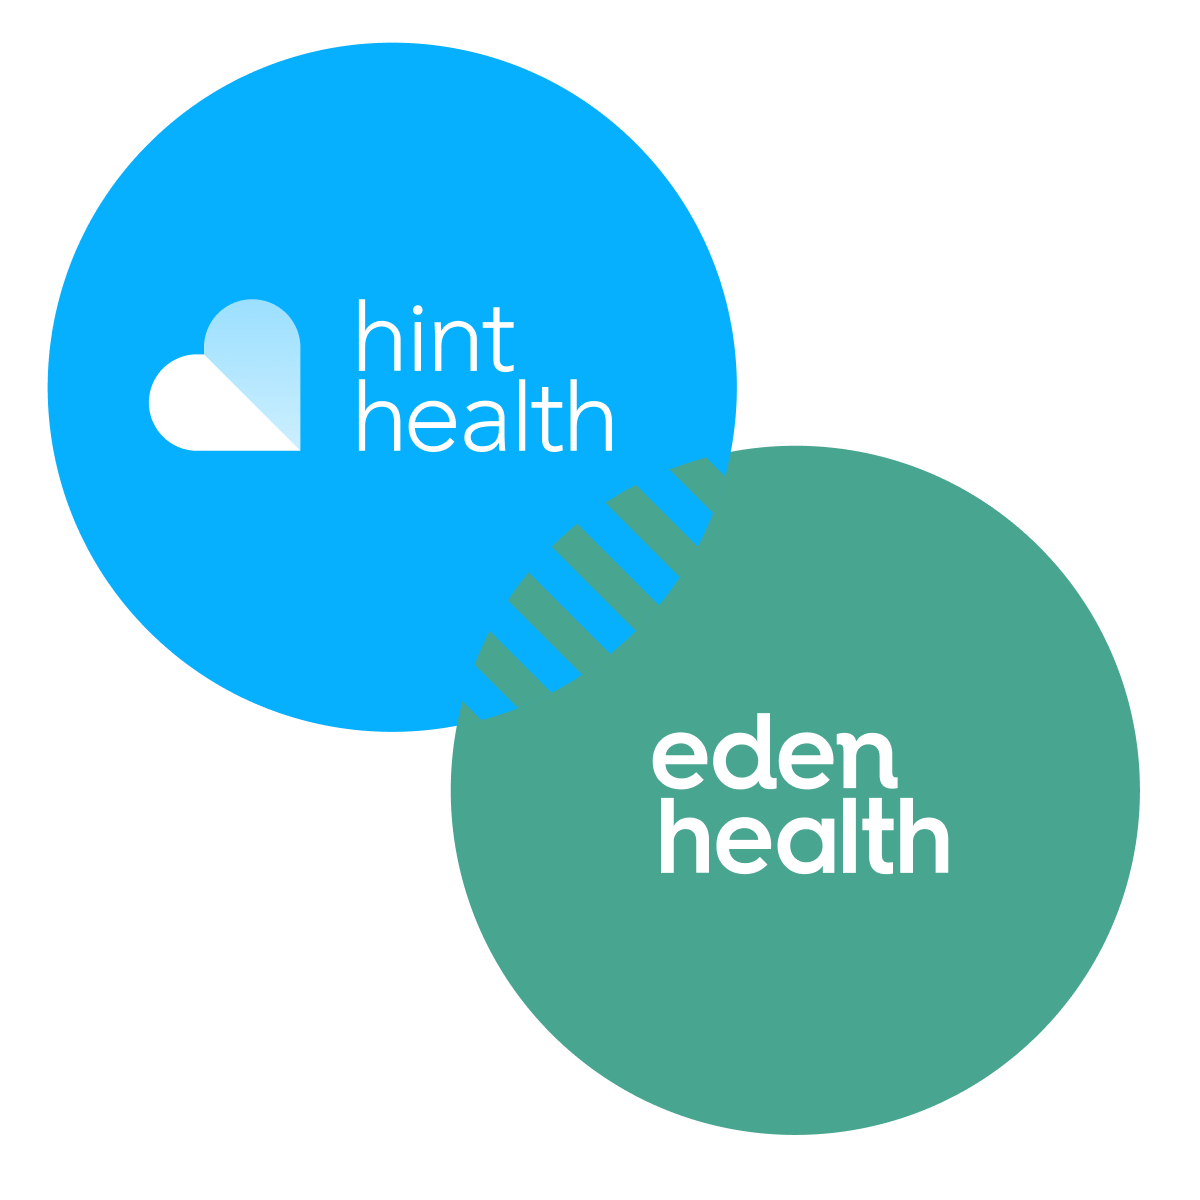 Eden Health: A Perfect Complement to Direct Primary Care